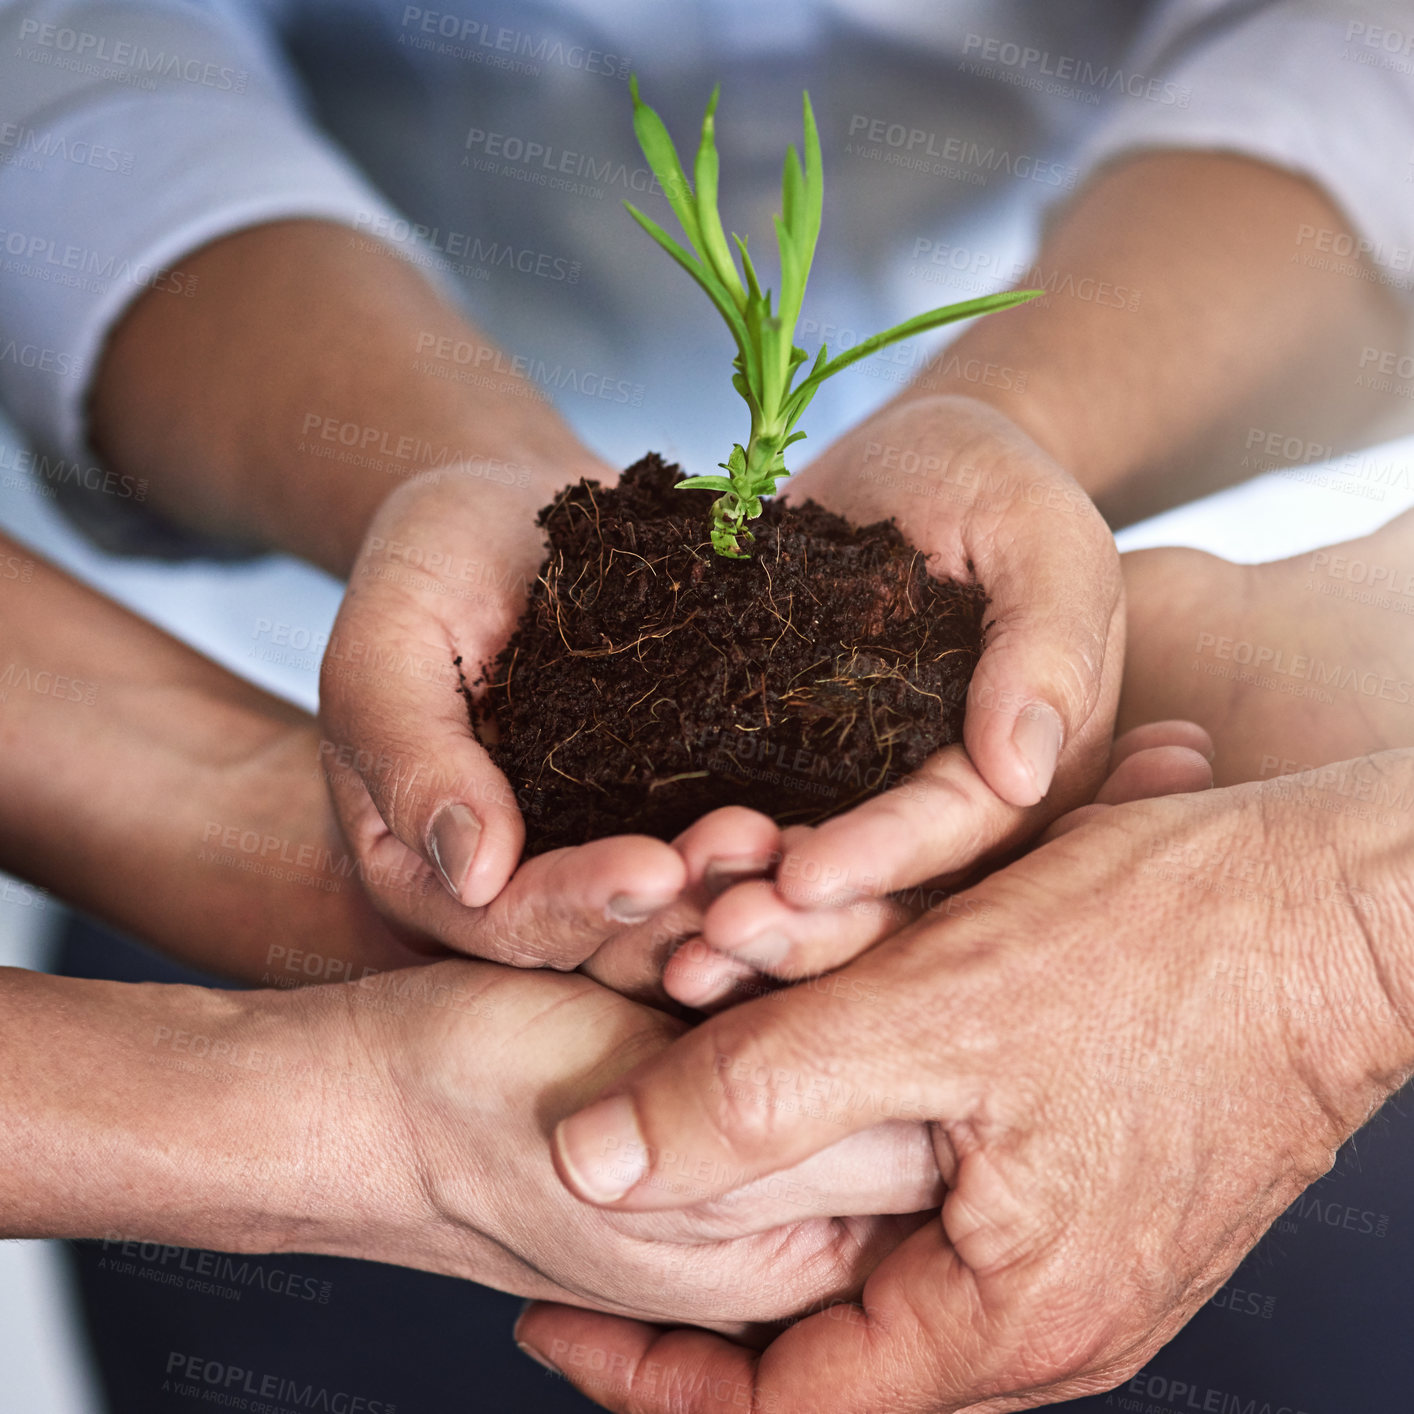 Buy stock photo Shhot of a group of businesspeople's hands holding a young plant in soil